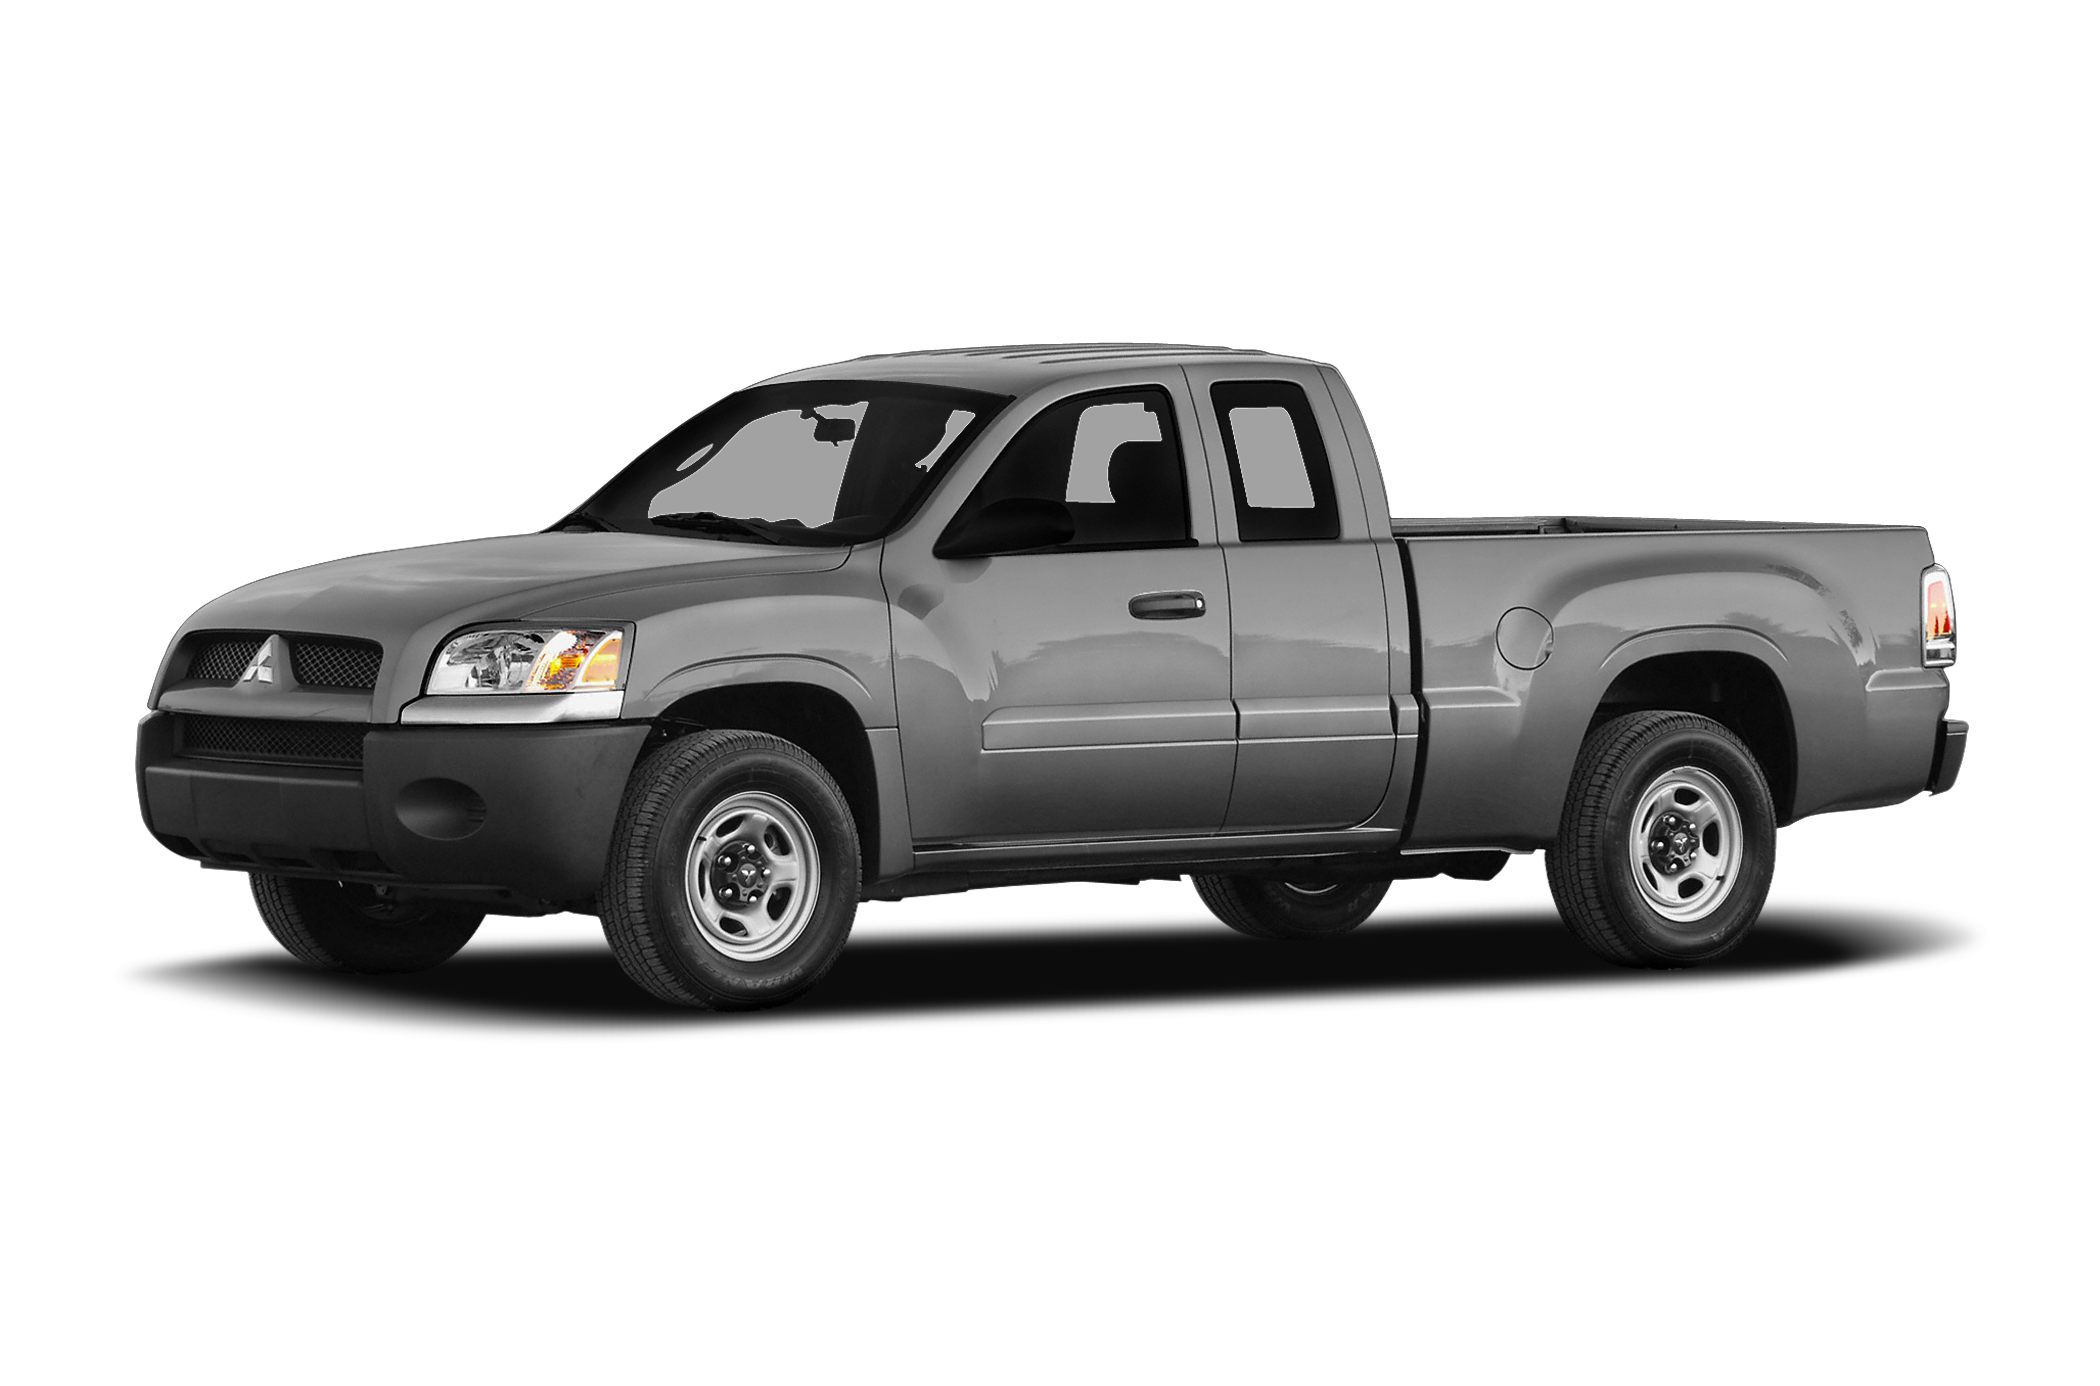 2009 Nissan frontier reliability reviews #10